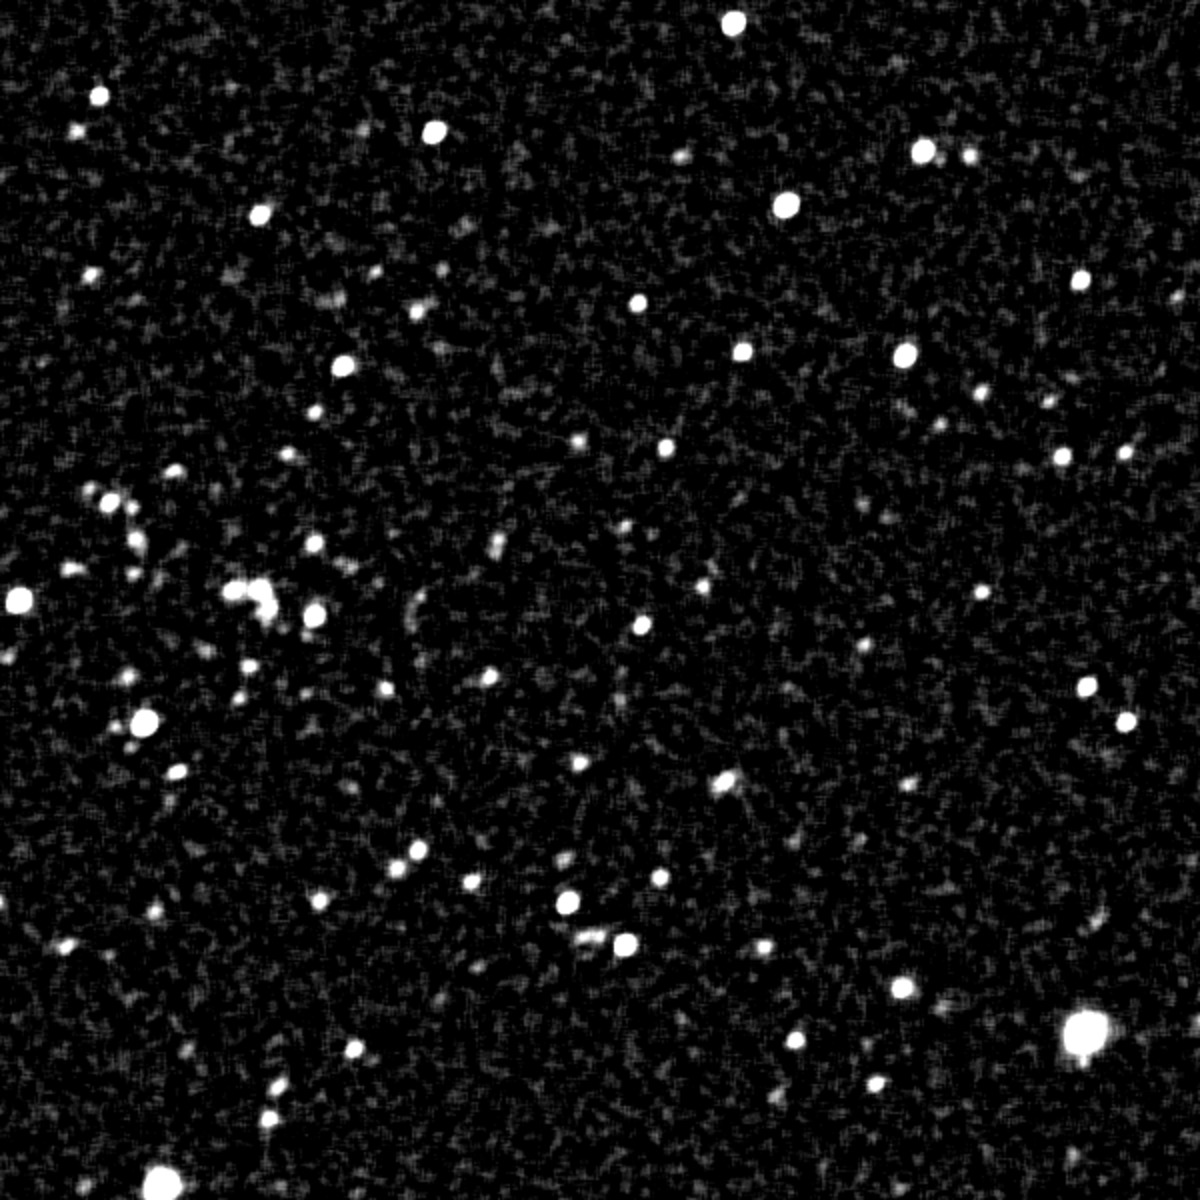 GIF animated image of in which one can see four asteroids moving. The asteroids are annotated (from top to bottom, left to right): TP0212, TP0214 (385205) Michelvancamp, TP0211, TP0213.